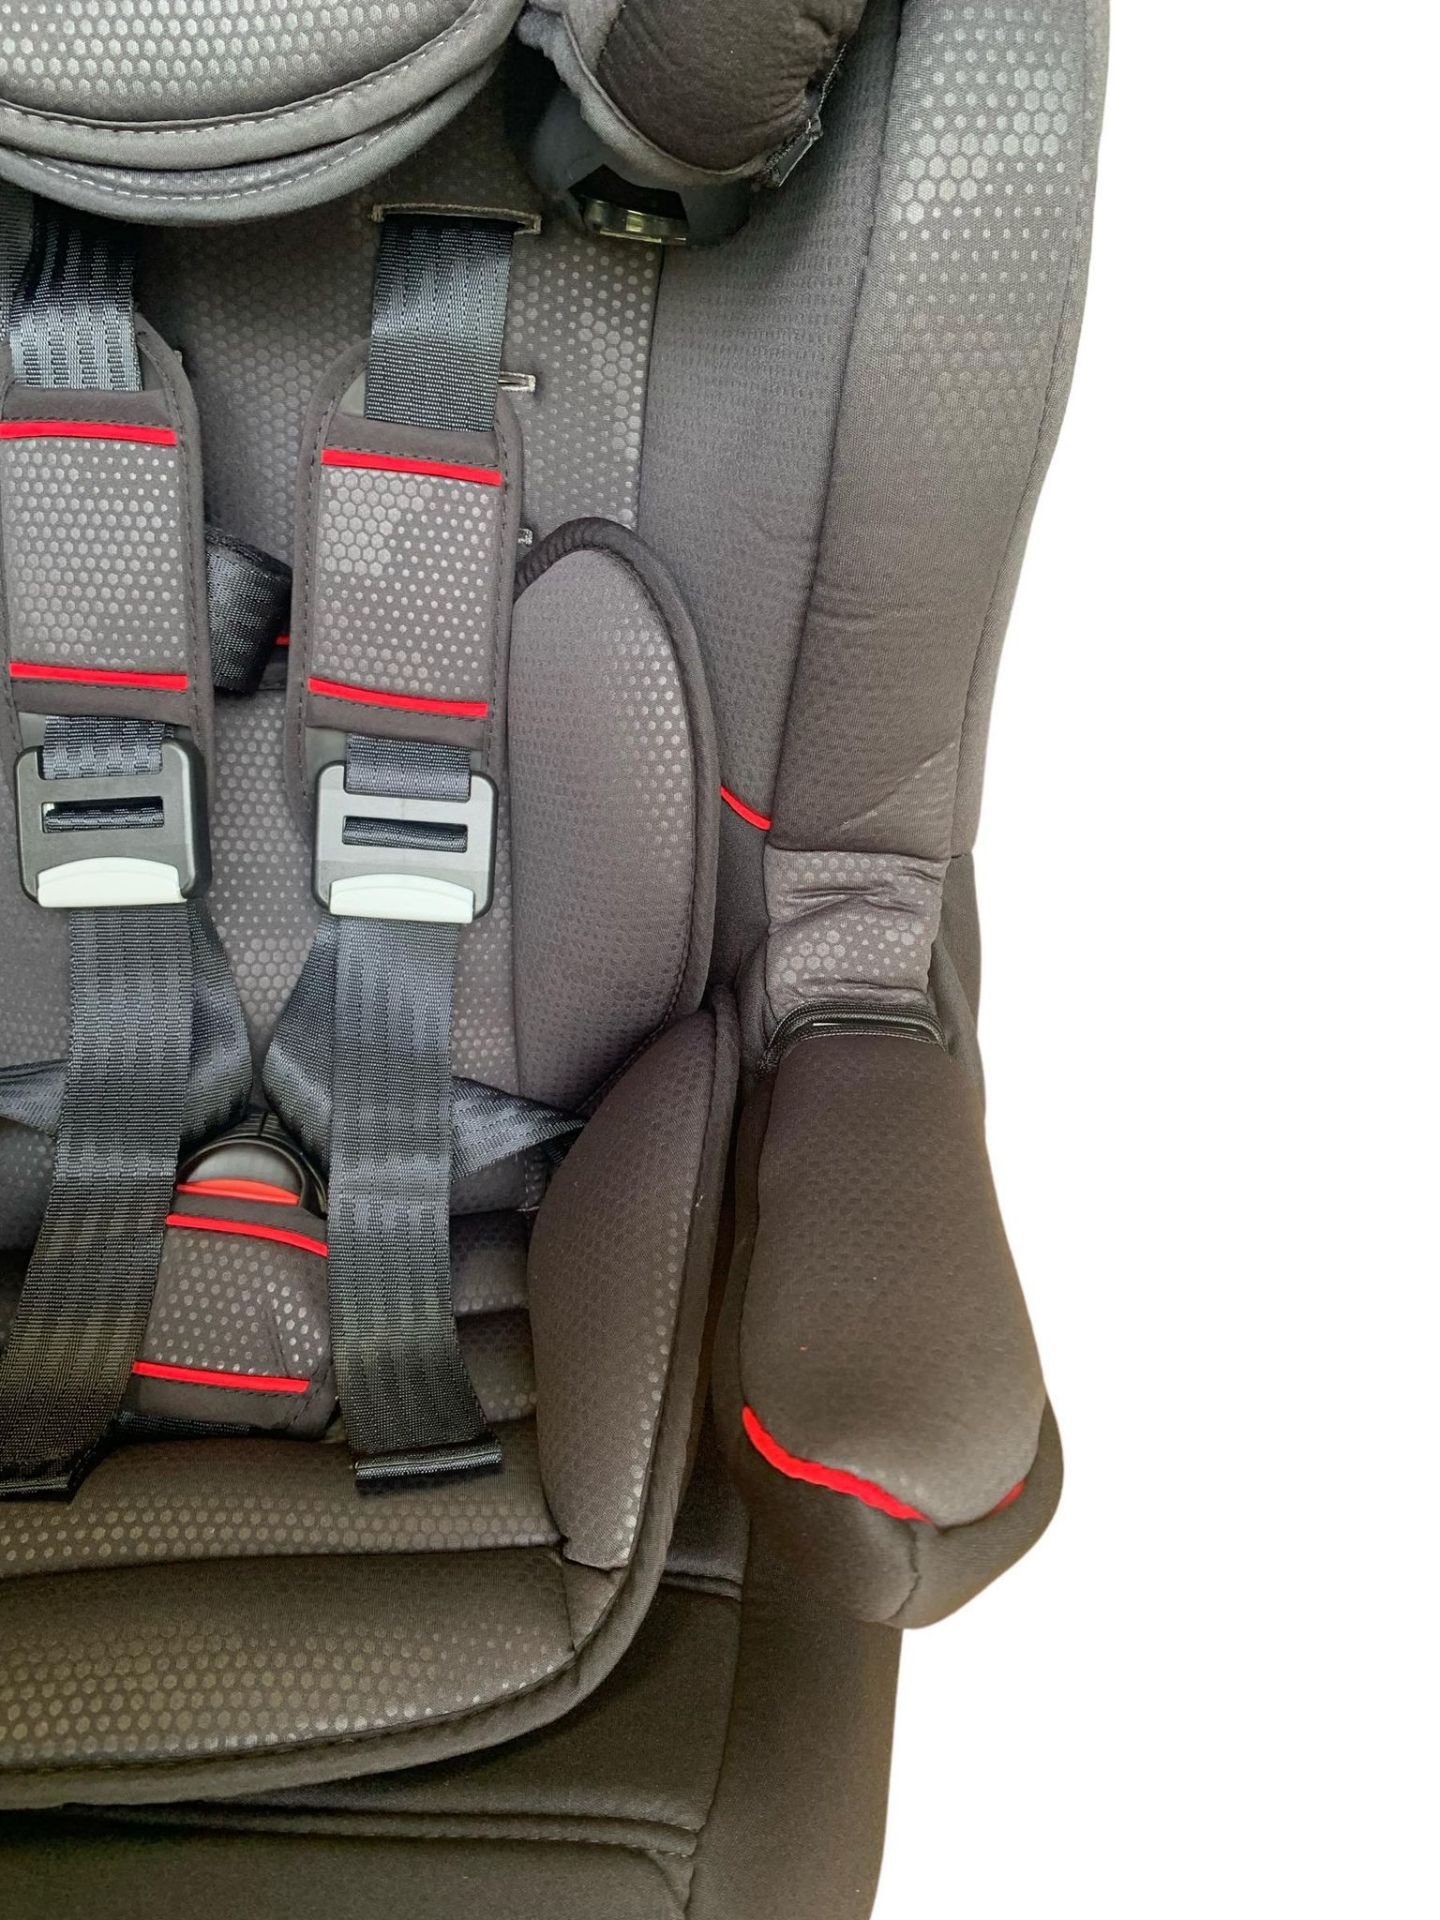 BRAND NEW CUGGL LINNET GROUP 1/2/3 ISOFIX CAR SEAT - Image 2 of 6